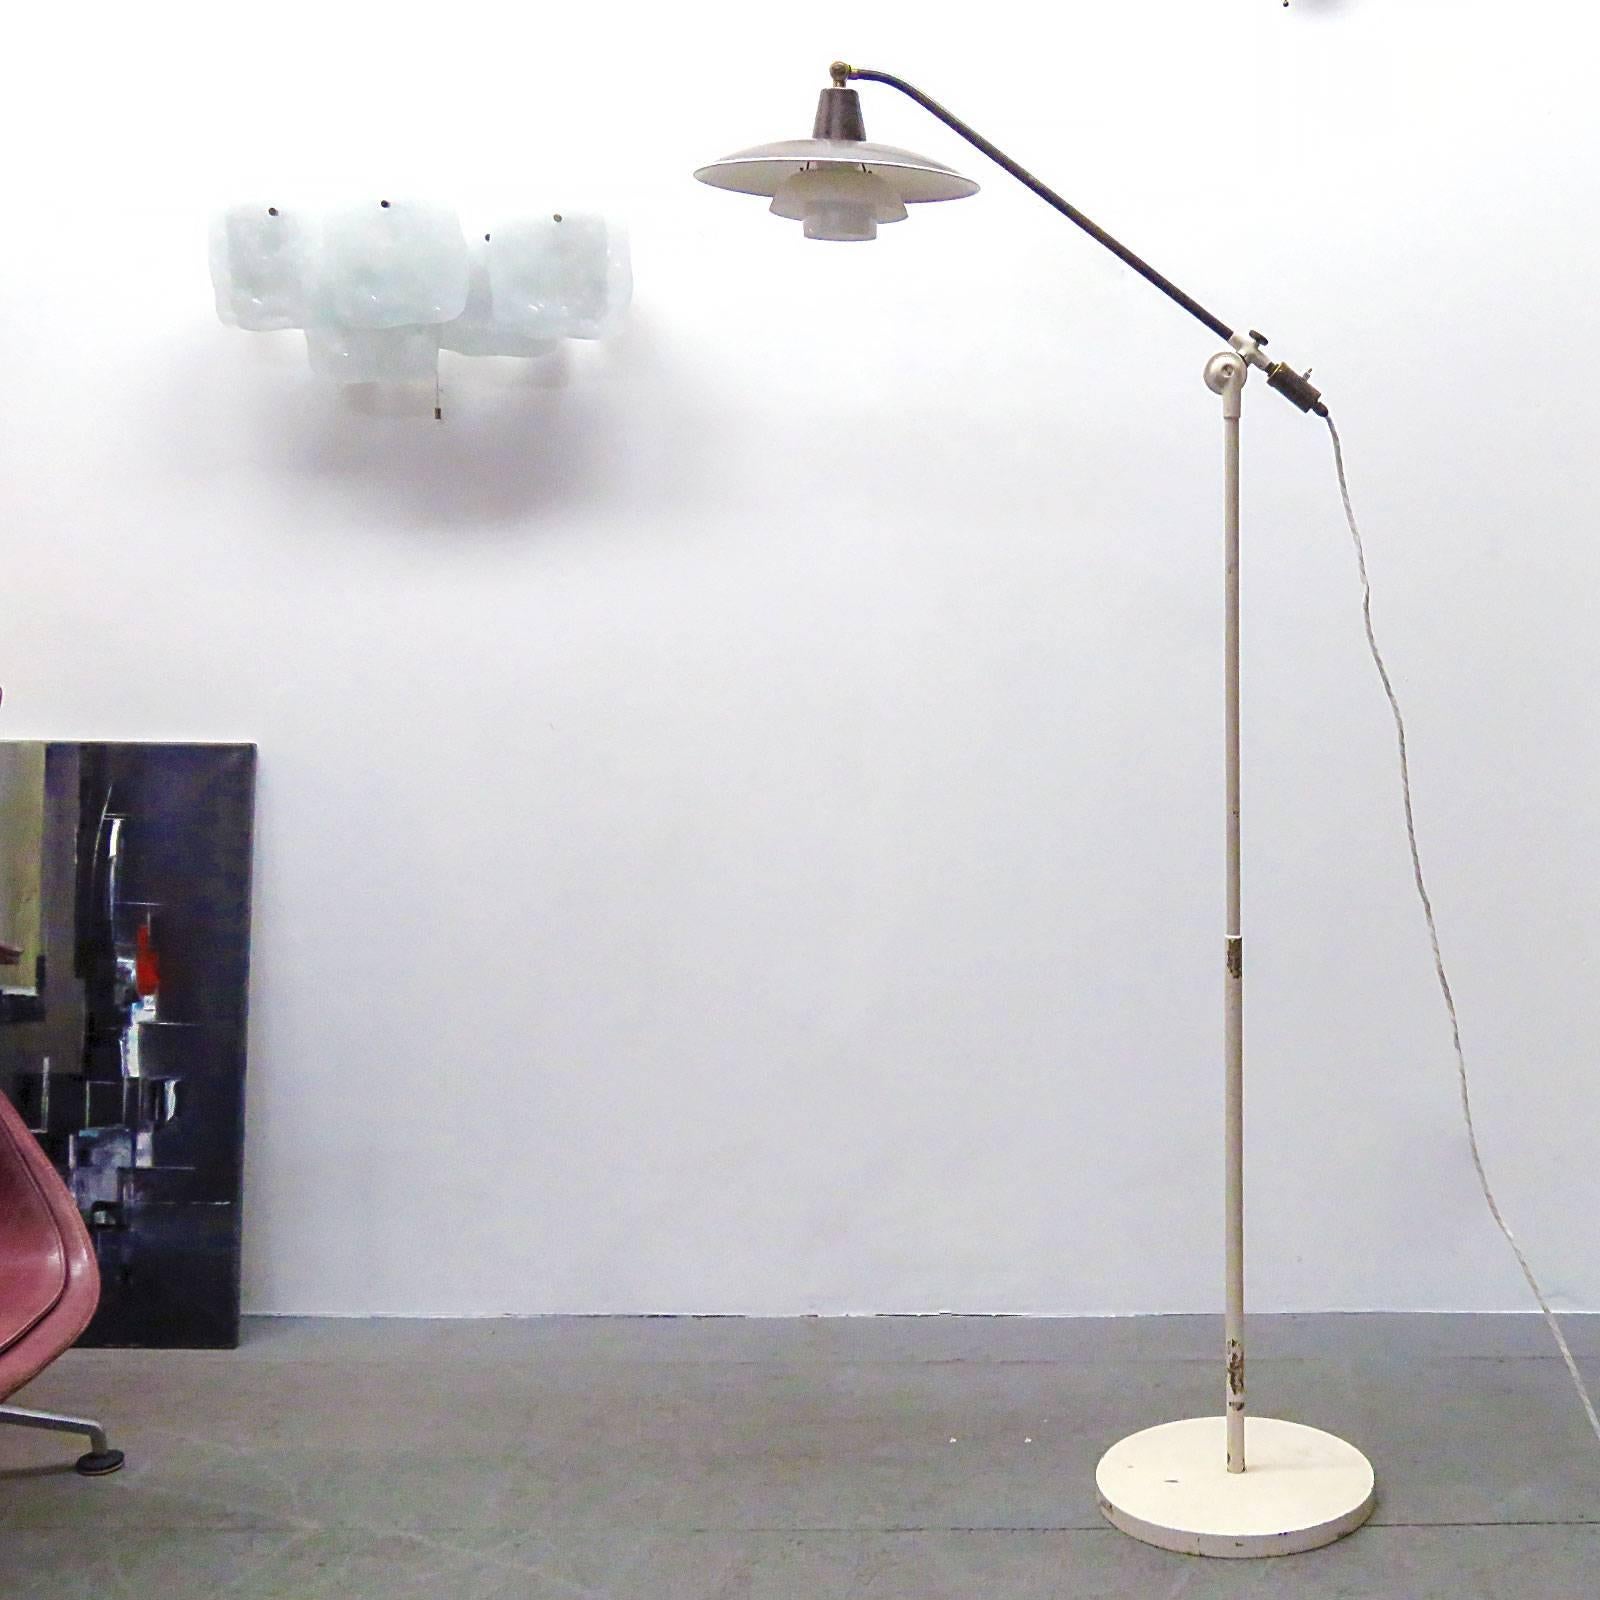 Stunning 1940s floor lamp, model 'Vandpumpen' (water pump) by Poul Henningsen for Louis Poulsen, with adjustable arm. (H.130-150 cm) upper shade and socket cover in brass, middle and lower shade in opaline glass, bottom diffuser in frosted glass.